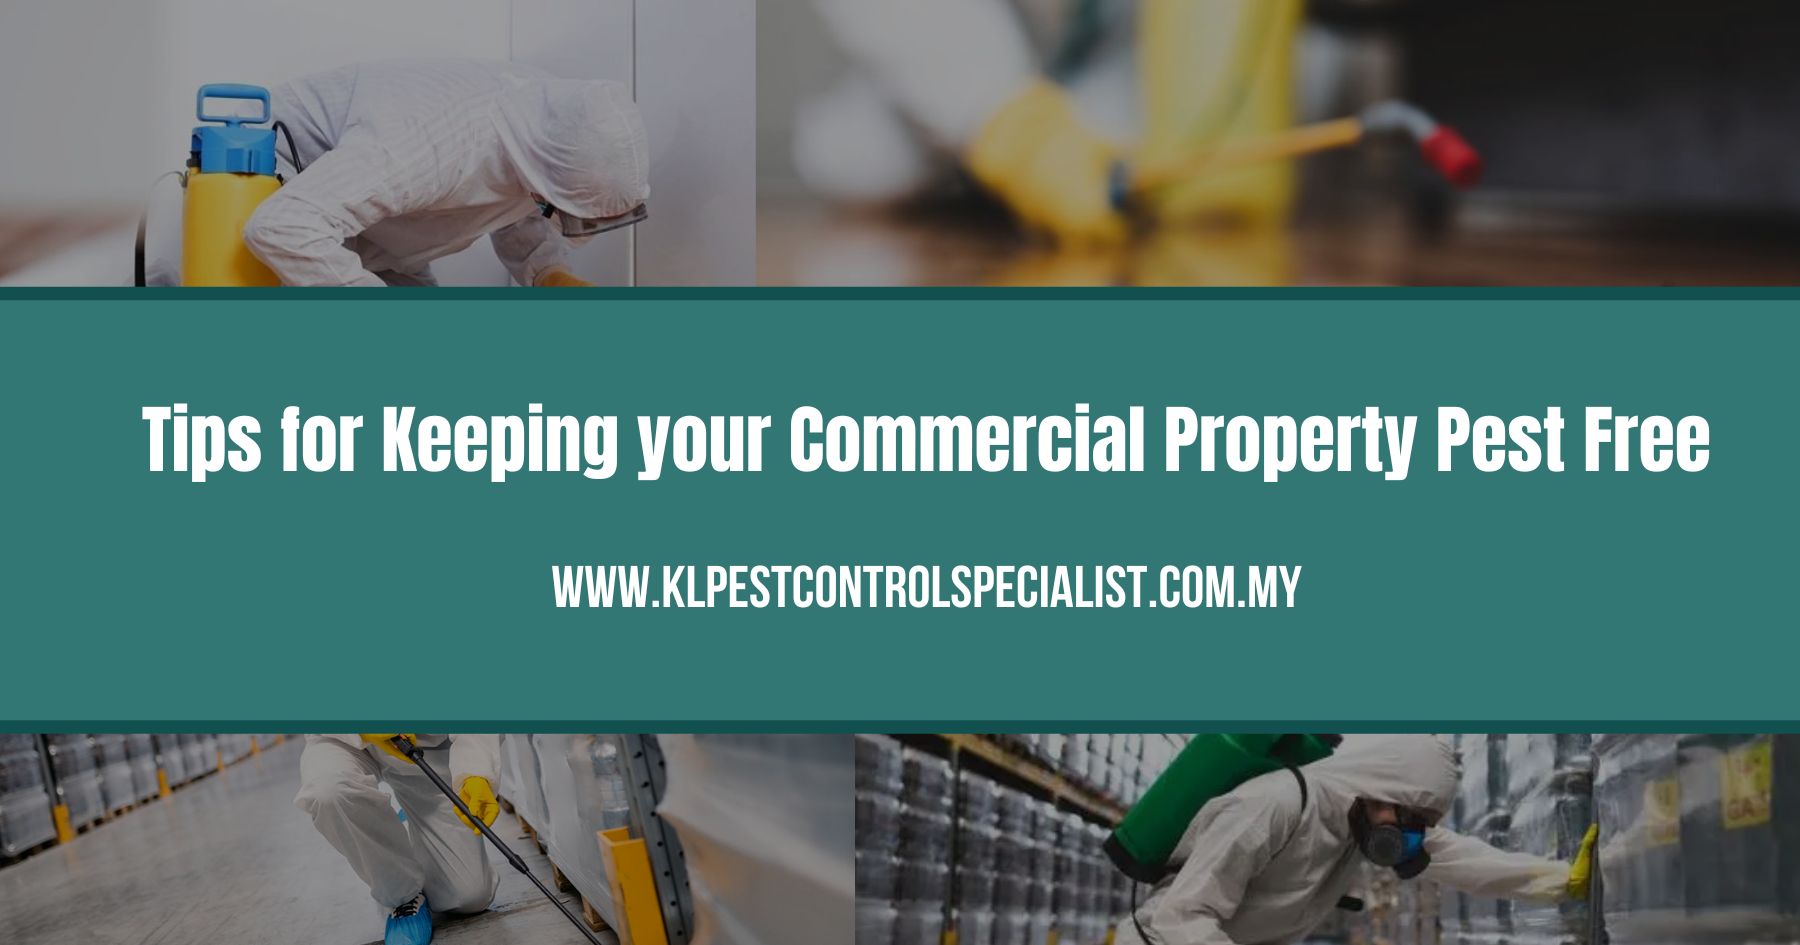 Tips for Keeping your Commercial Property Pest Free